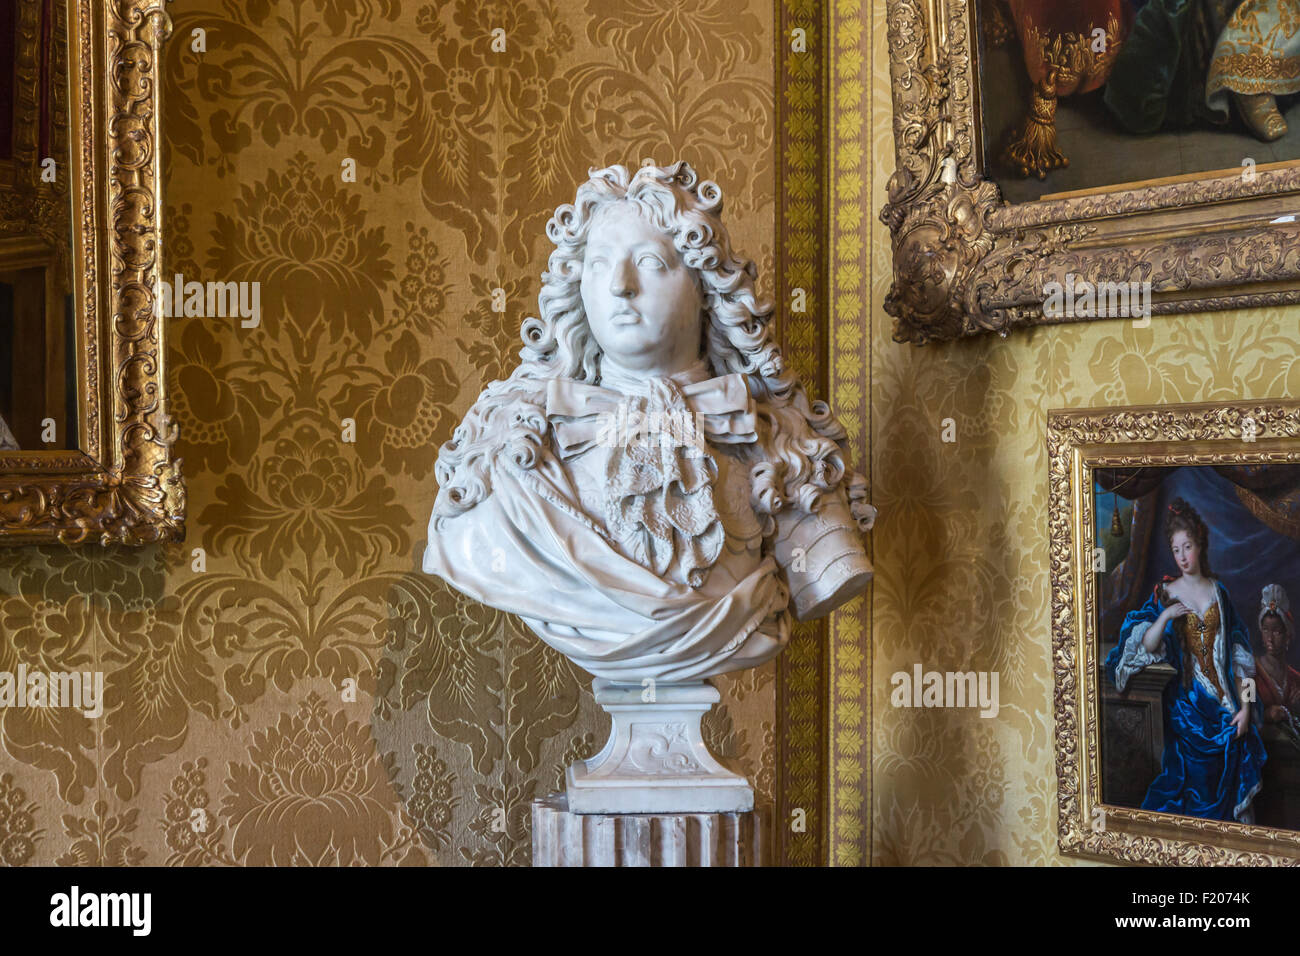 Bust of Grand Dauphin Louis de France (1661-1711) in the Palace of Versailles (Chateau), near Paris, France Stock Photo